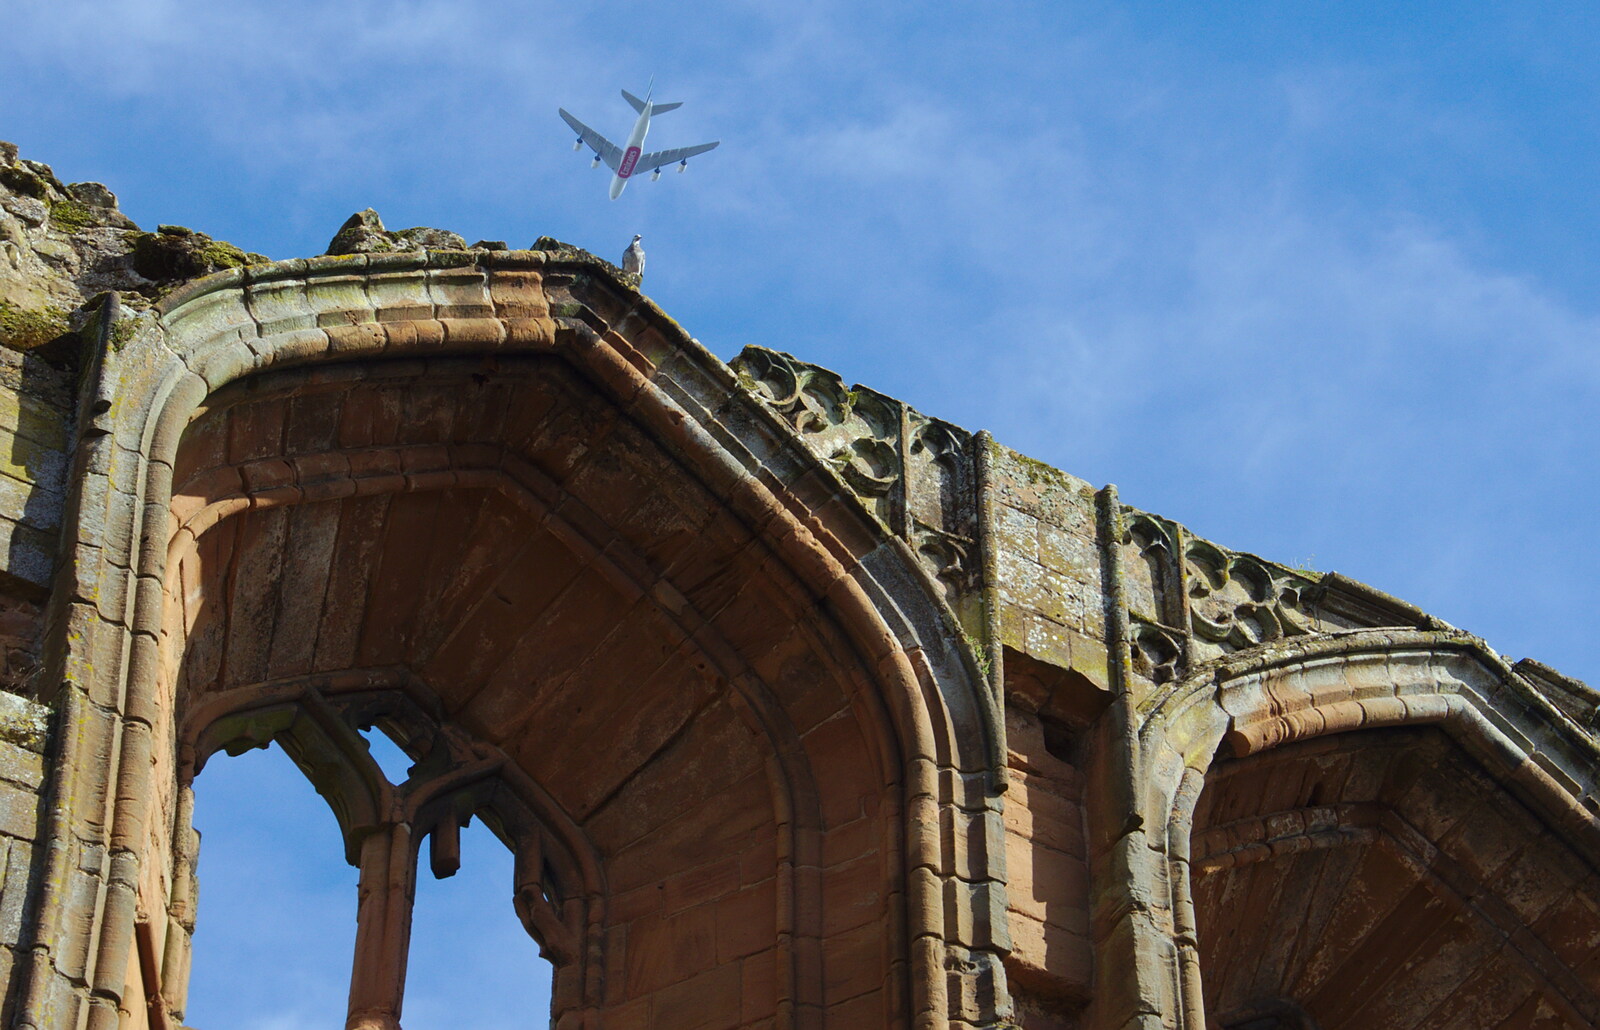 A plane flies over as a pigeon sits on a wall from Kenilworth Castle and the 69th Entry Reunion Dinner, Stratford, Warwickshire - 14th September 2019